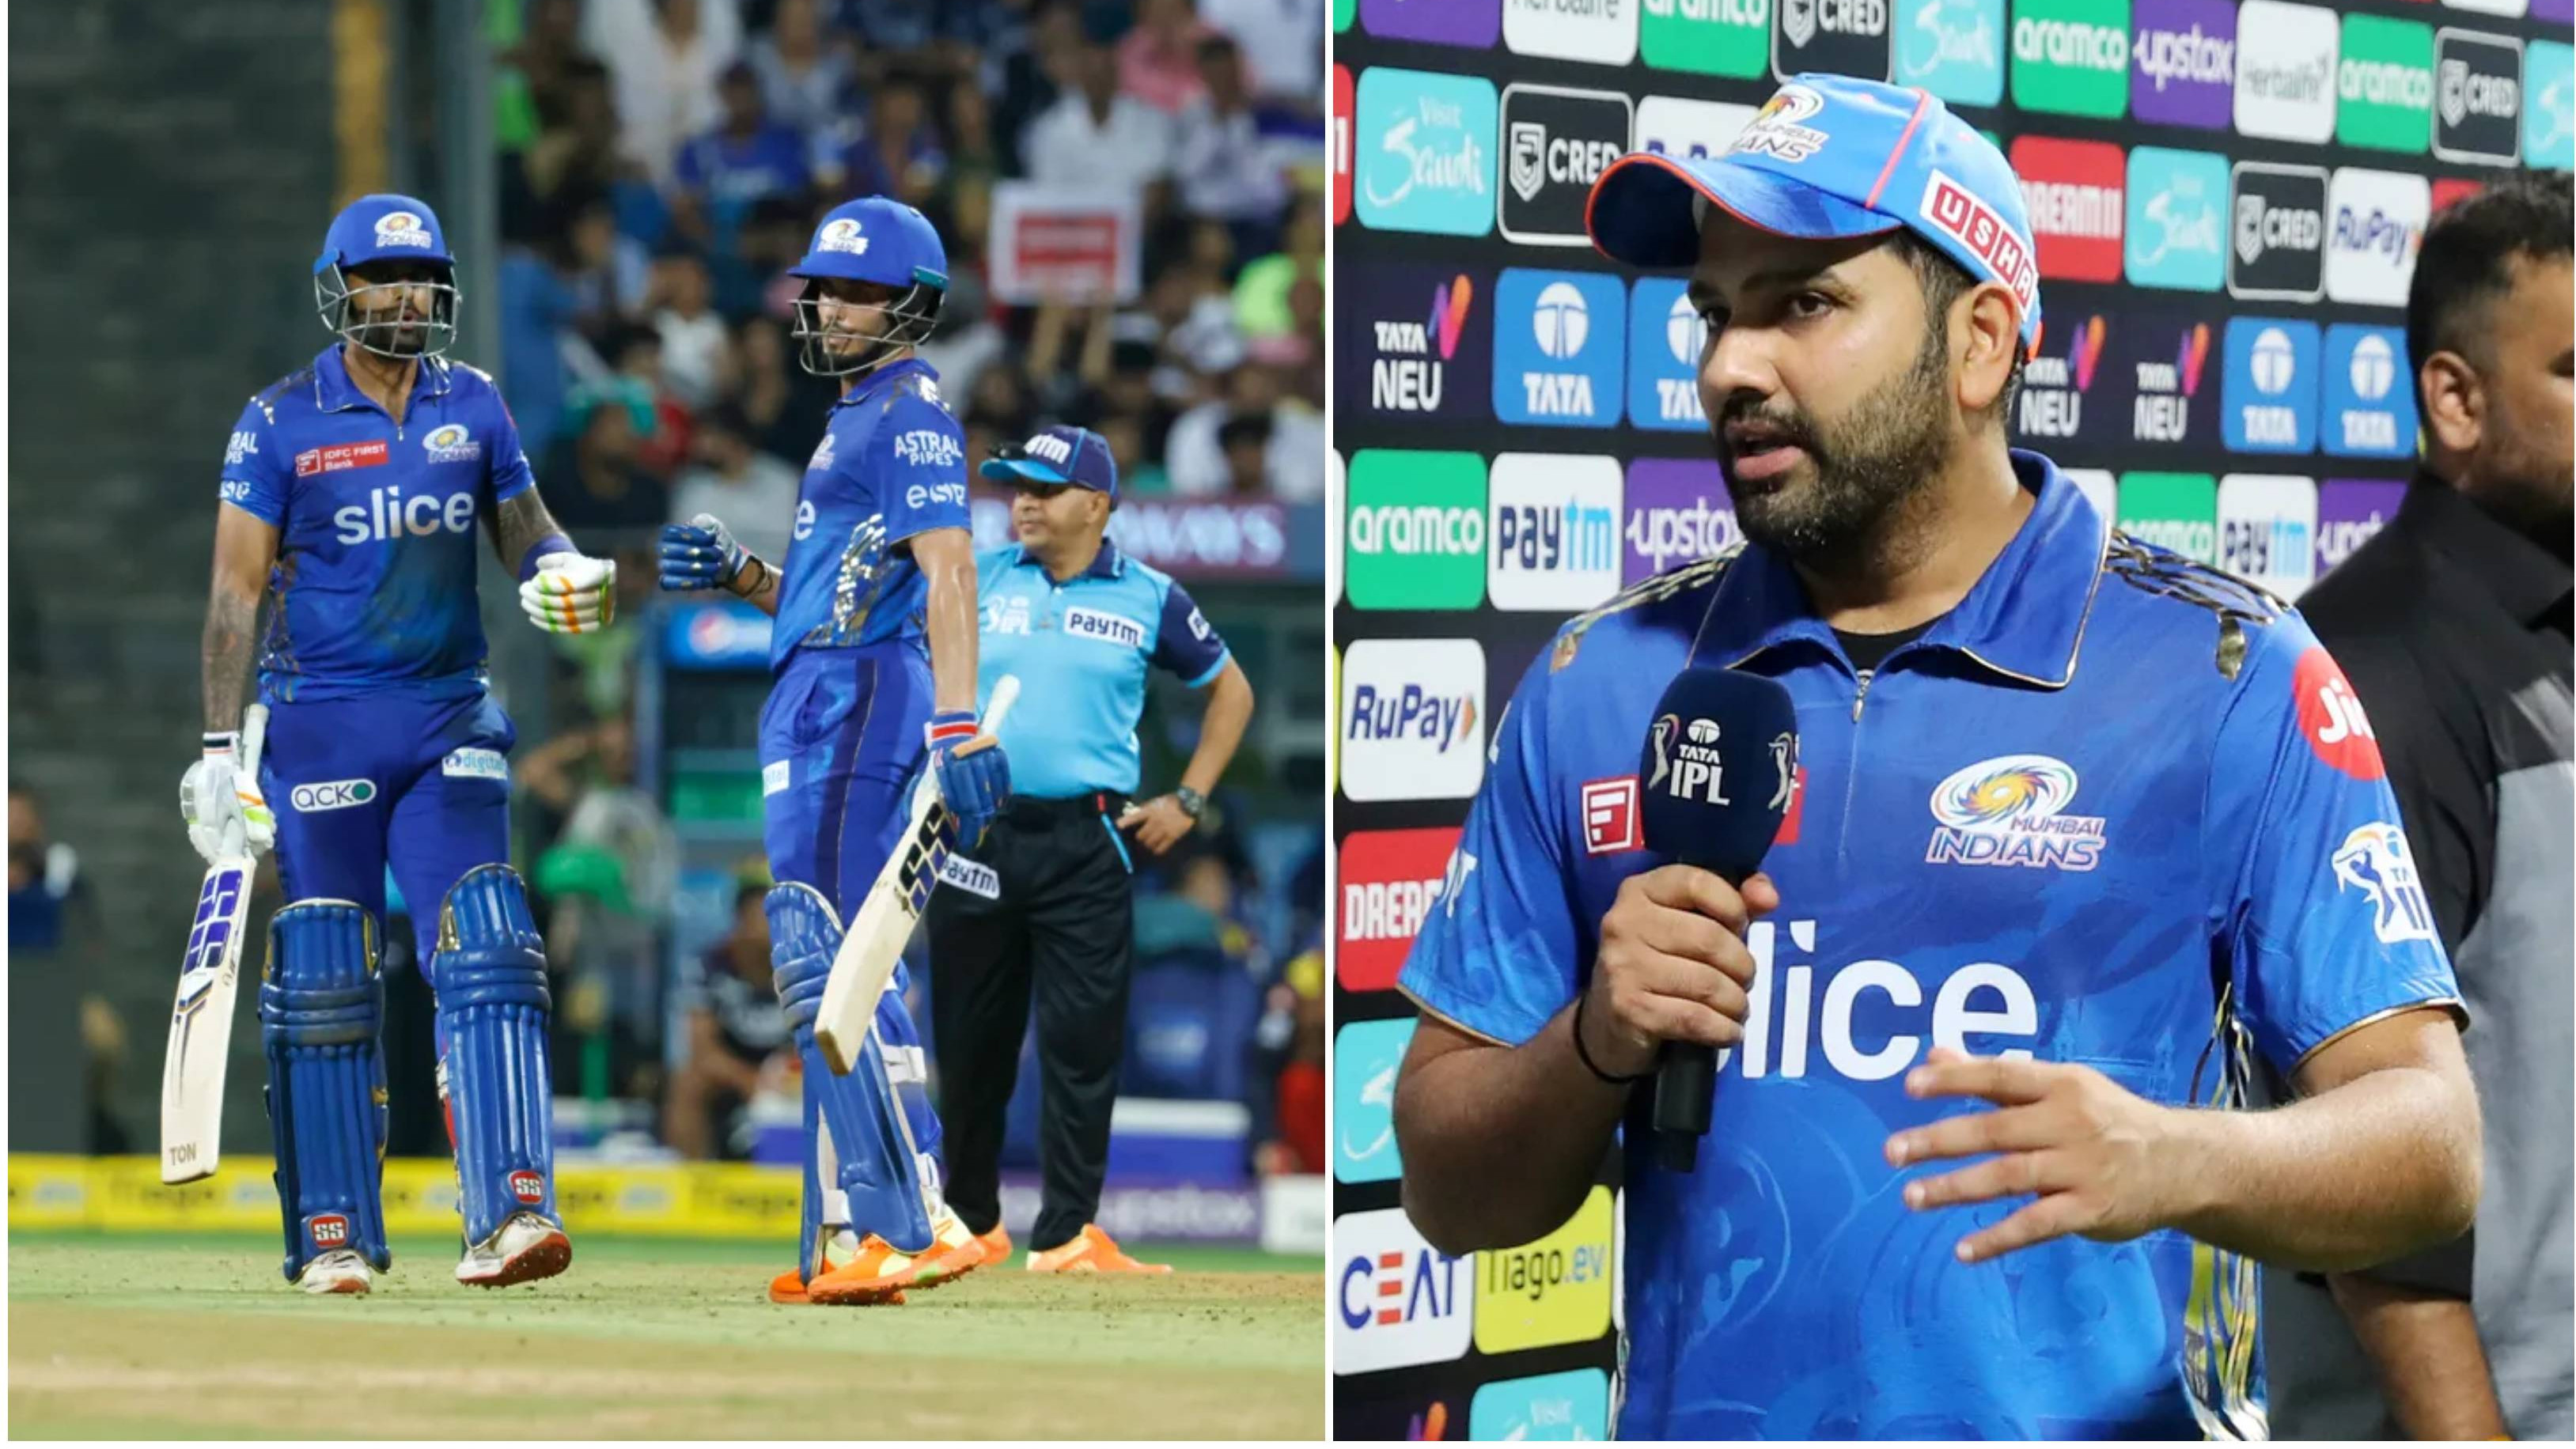 IPL 2023: “No idea what a safe score is,” says Rohit Sharma after MI overhaul RCB’s target of 200 in 16.3 overs